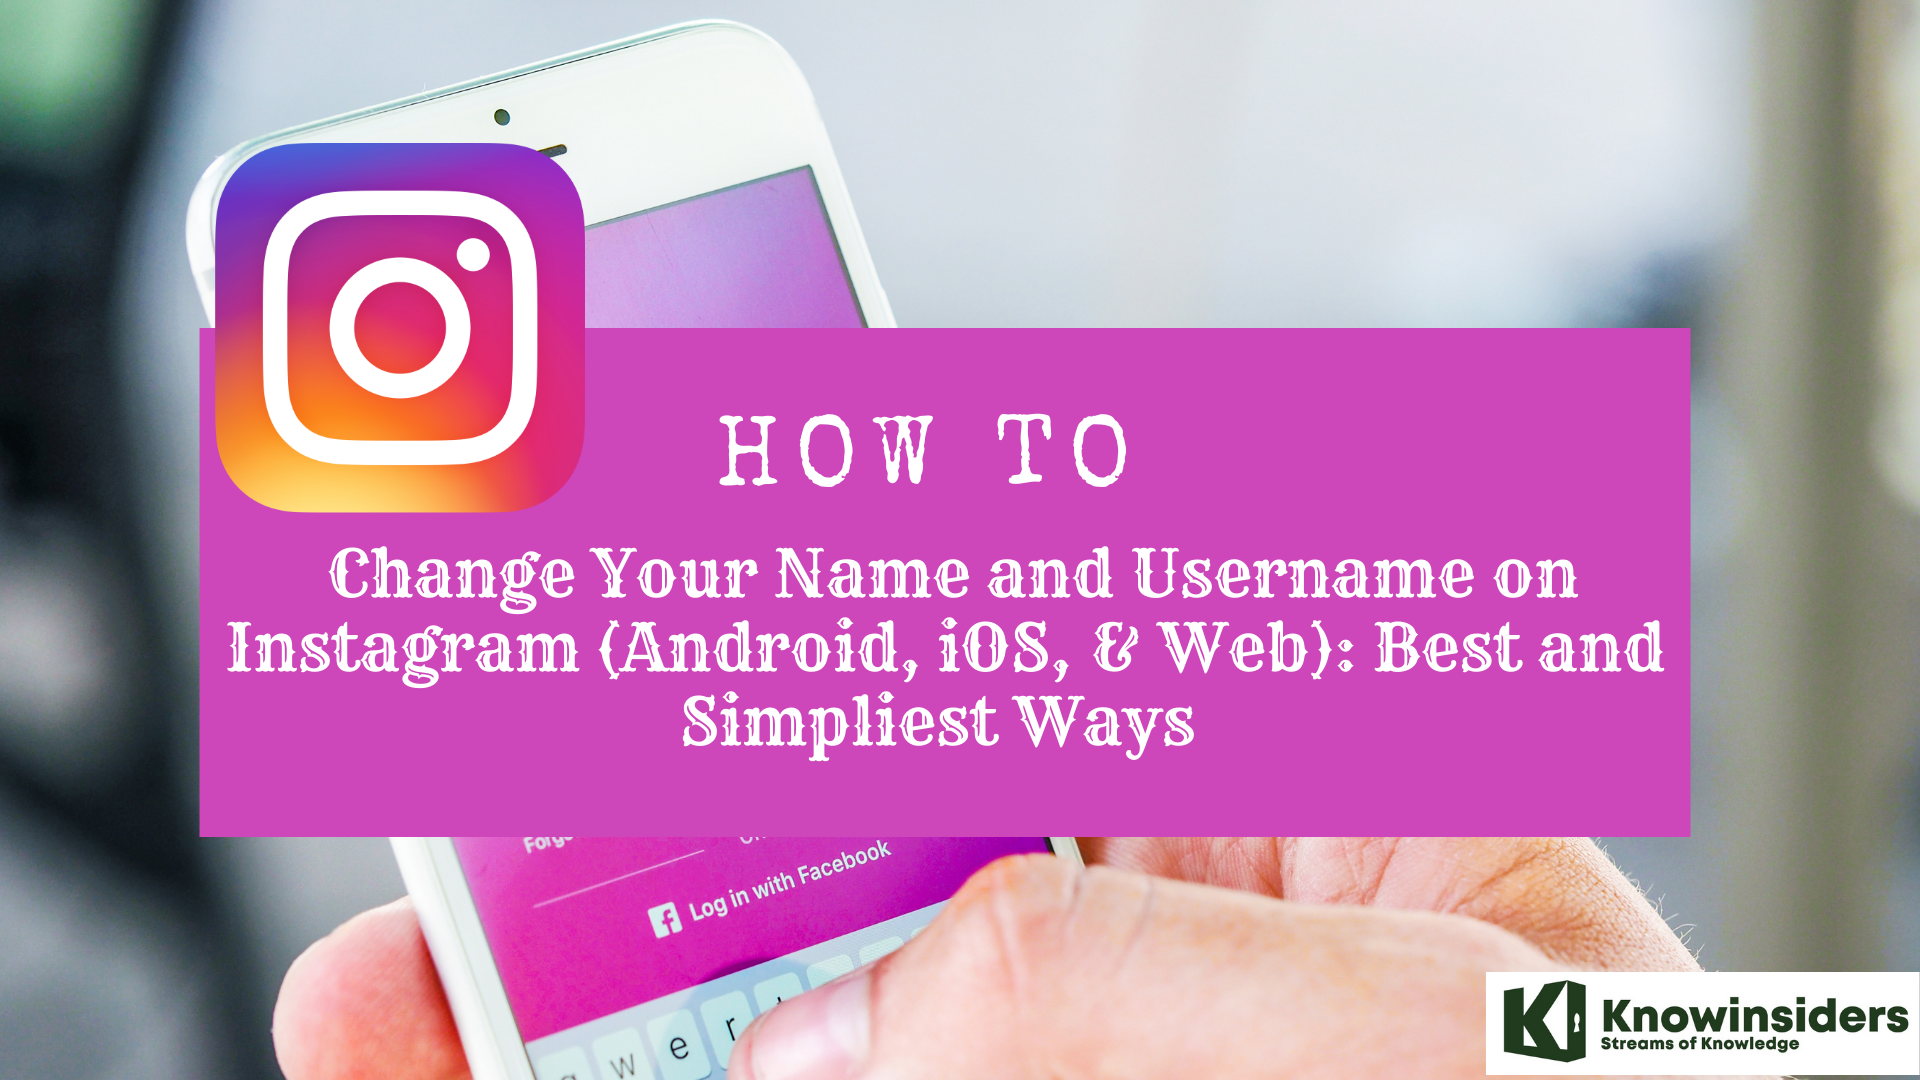 How to Change Your Name and Username on Instagram (Android, iOS, & Web): Best and Simpliest Ways 